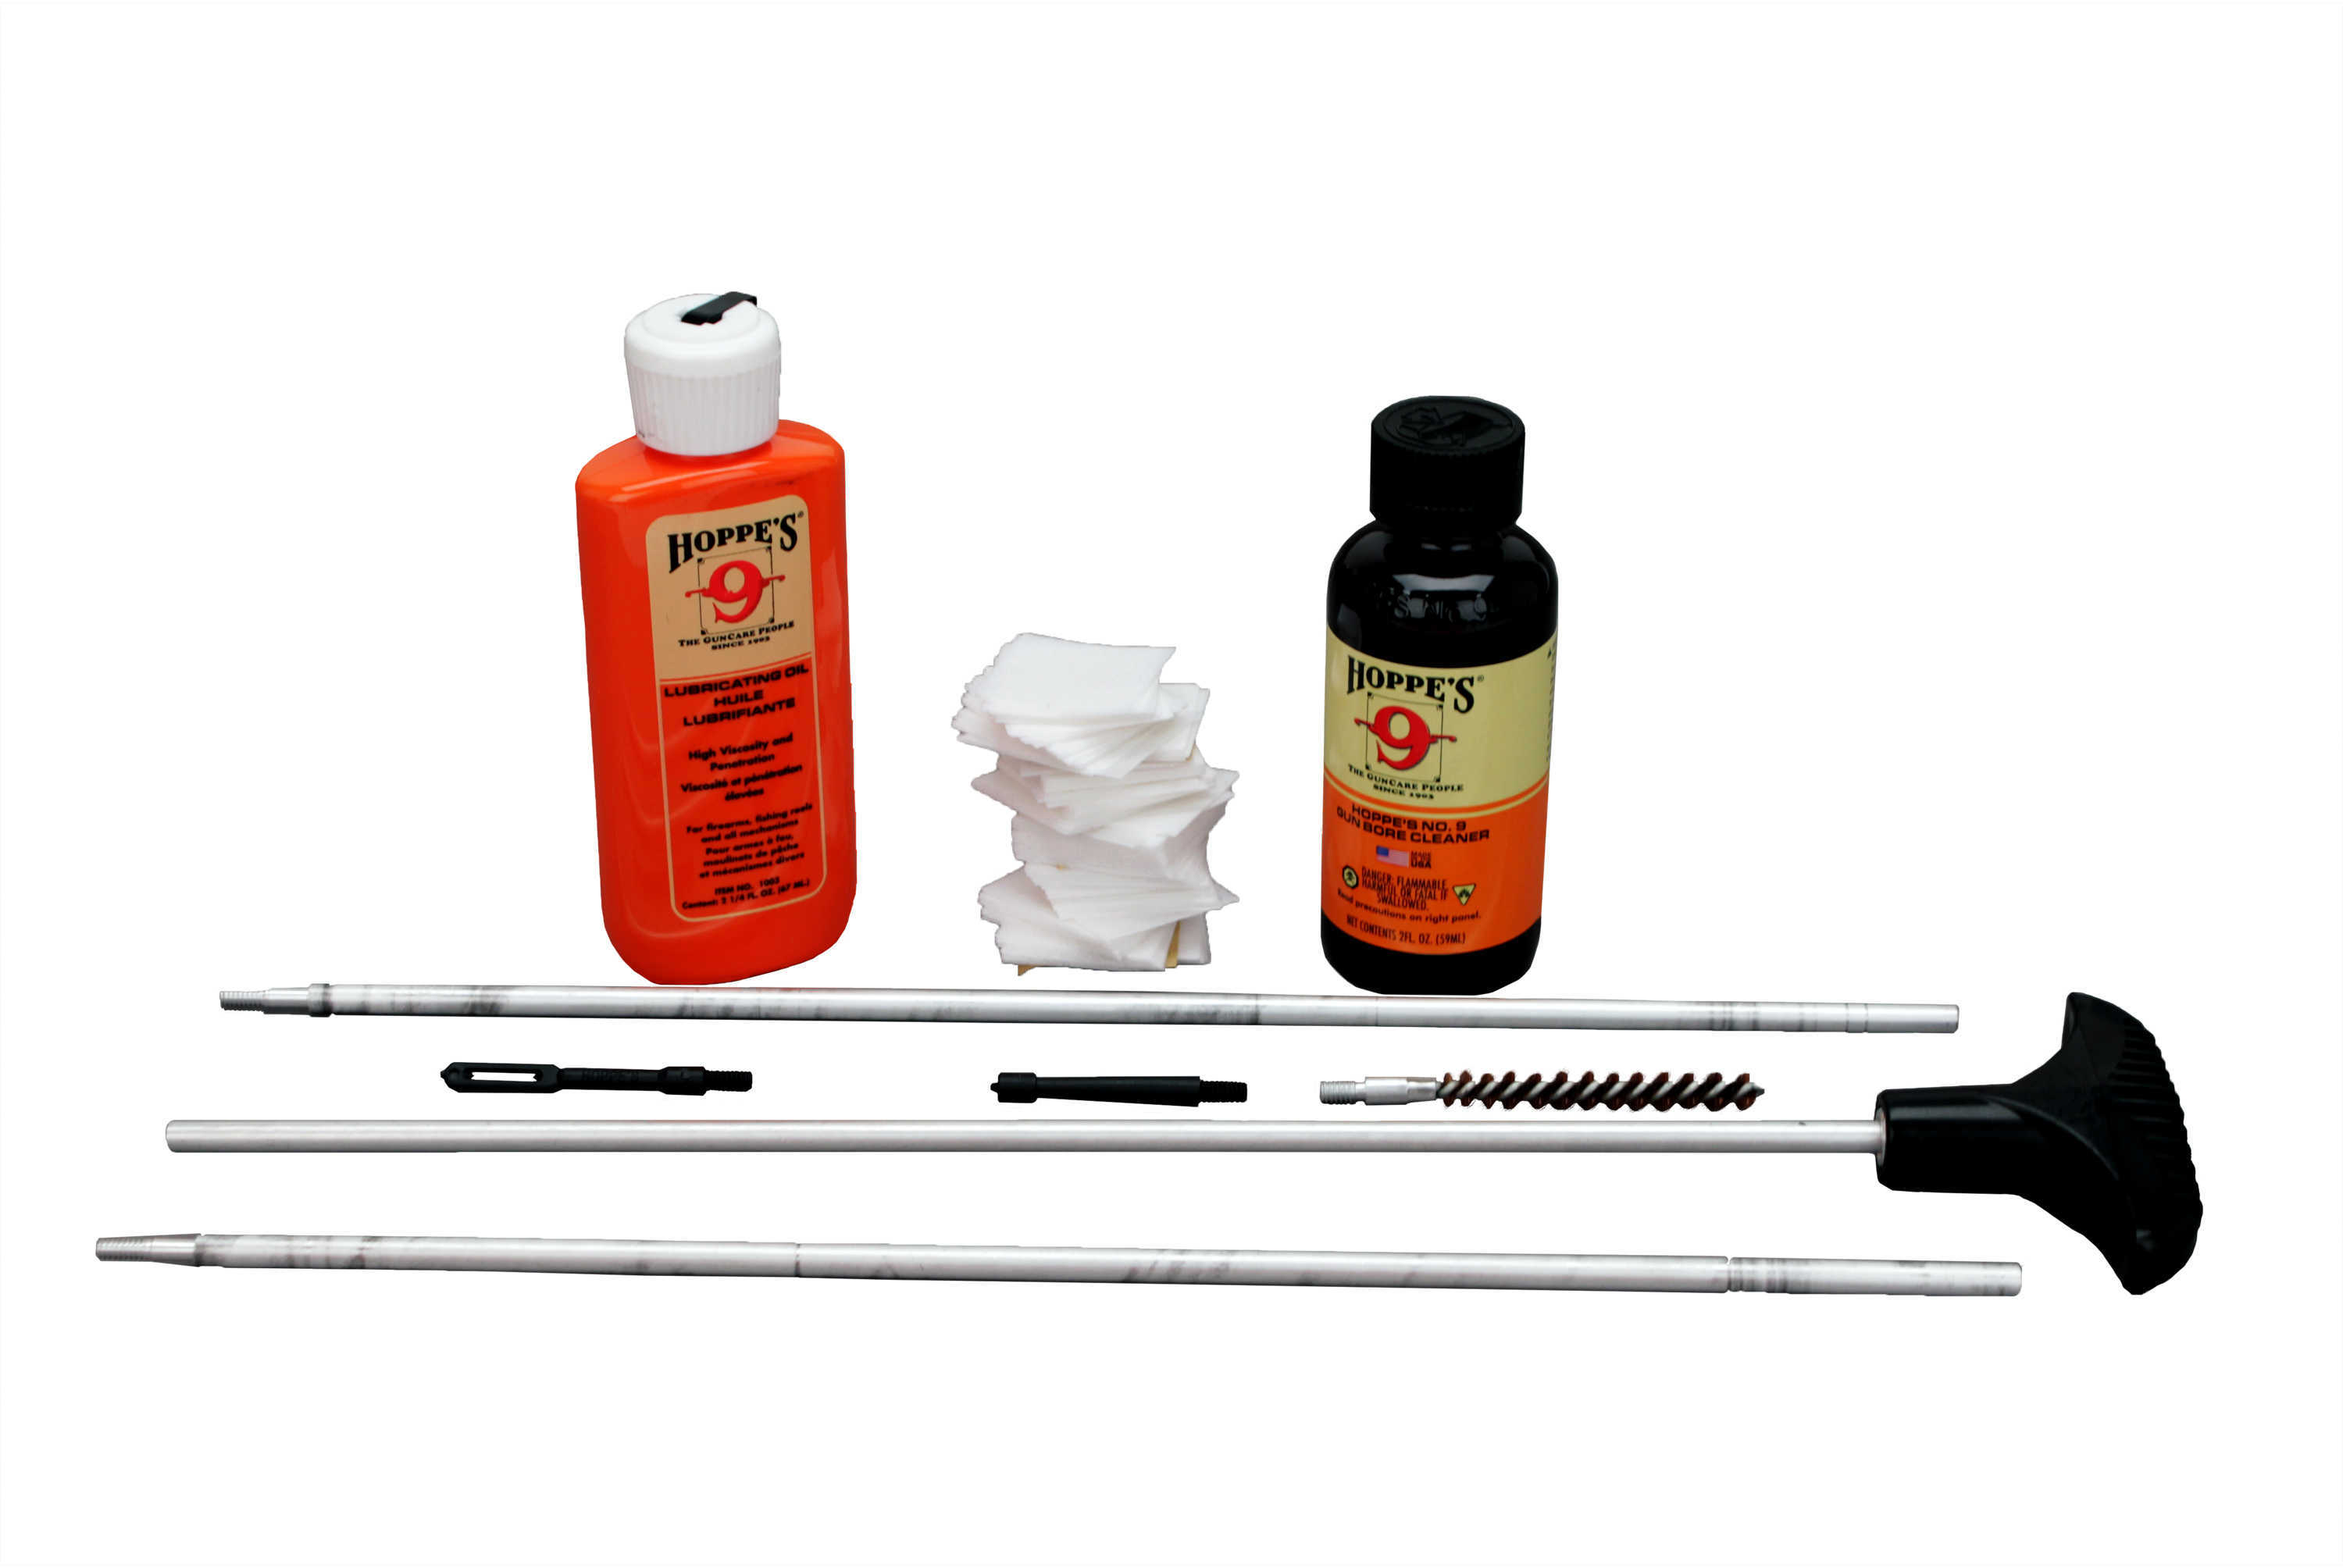 Hoppes Rifle Cleaning Kit - Clamshell .22 .222 .223 .224 .225 Cal Contains: 2 Oz No. 9 Solvent 2.25 Lubricating